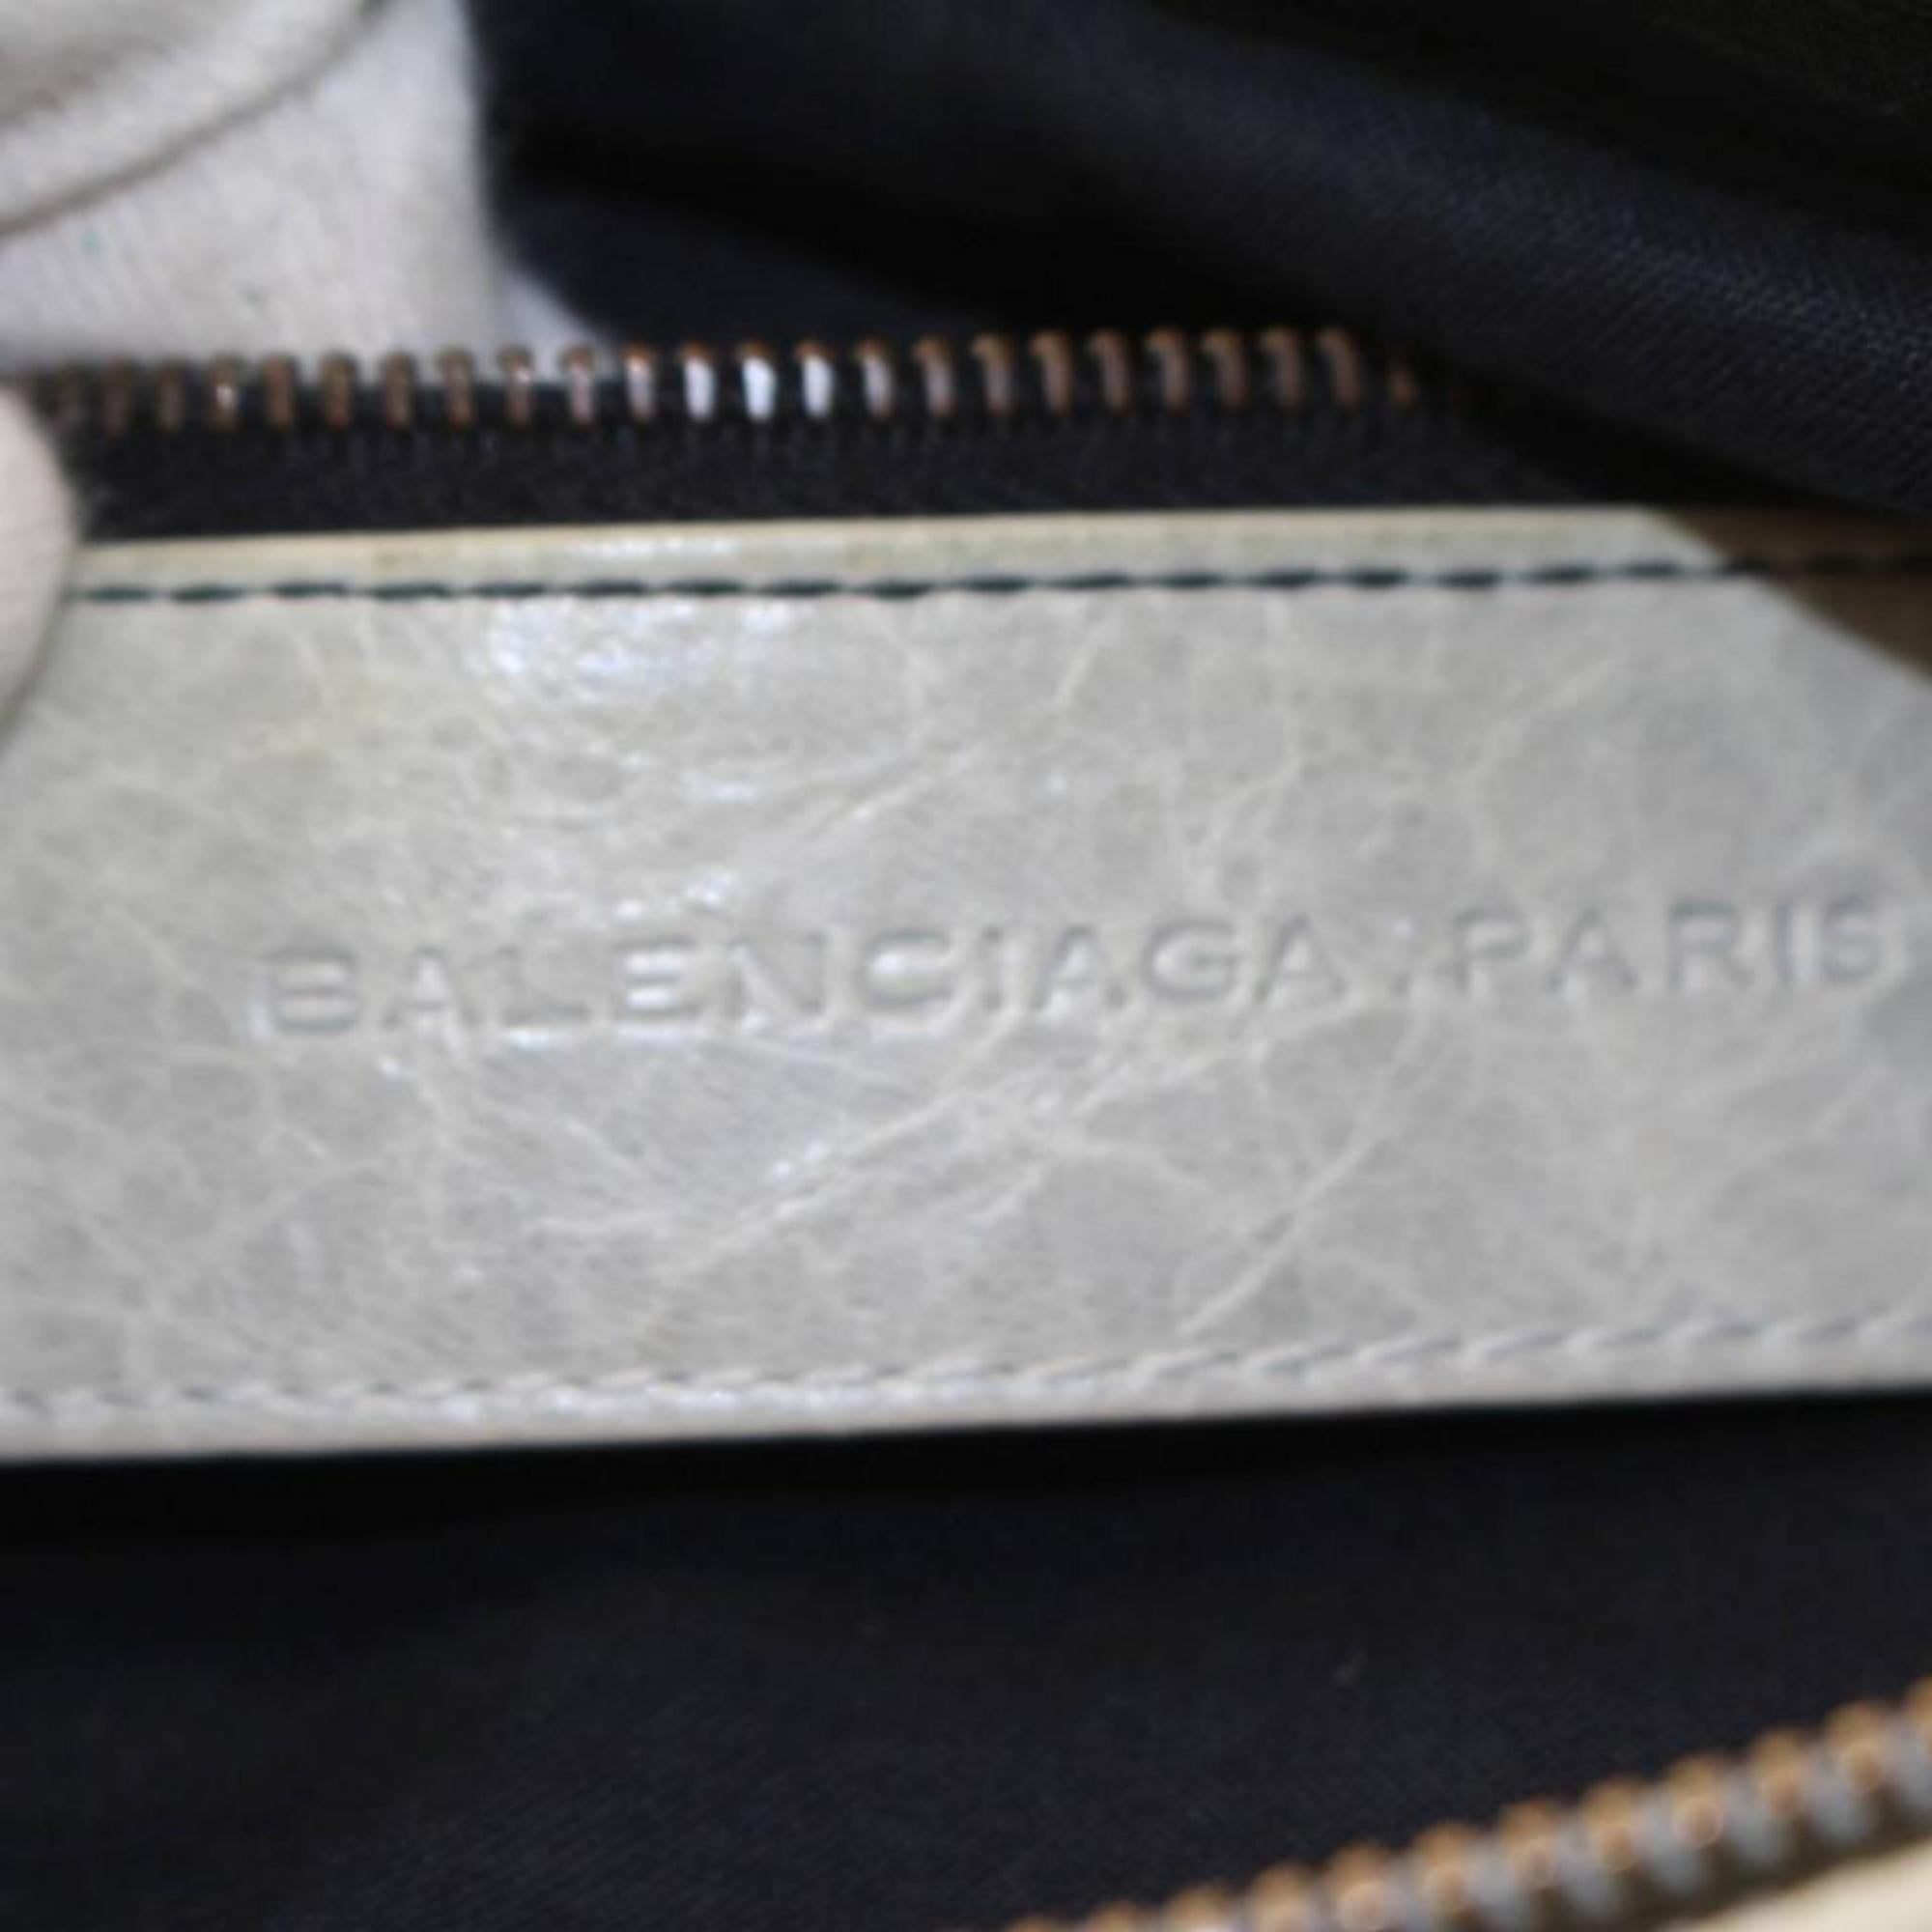 Balenciaga Pale The First 2way 869753 Green Leather Shoulder Bag In Fair Condition For Sale In Forest Hills, NY